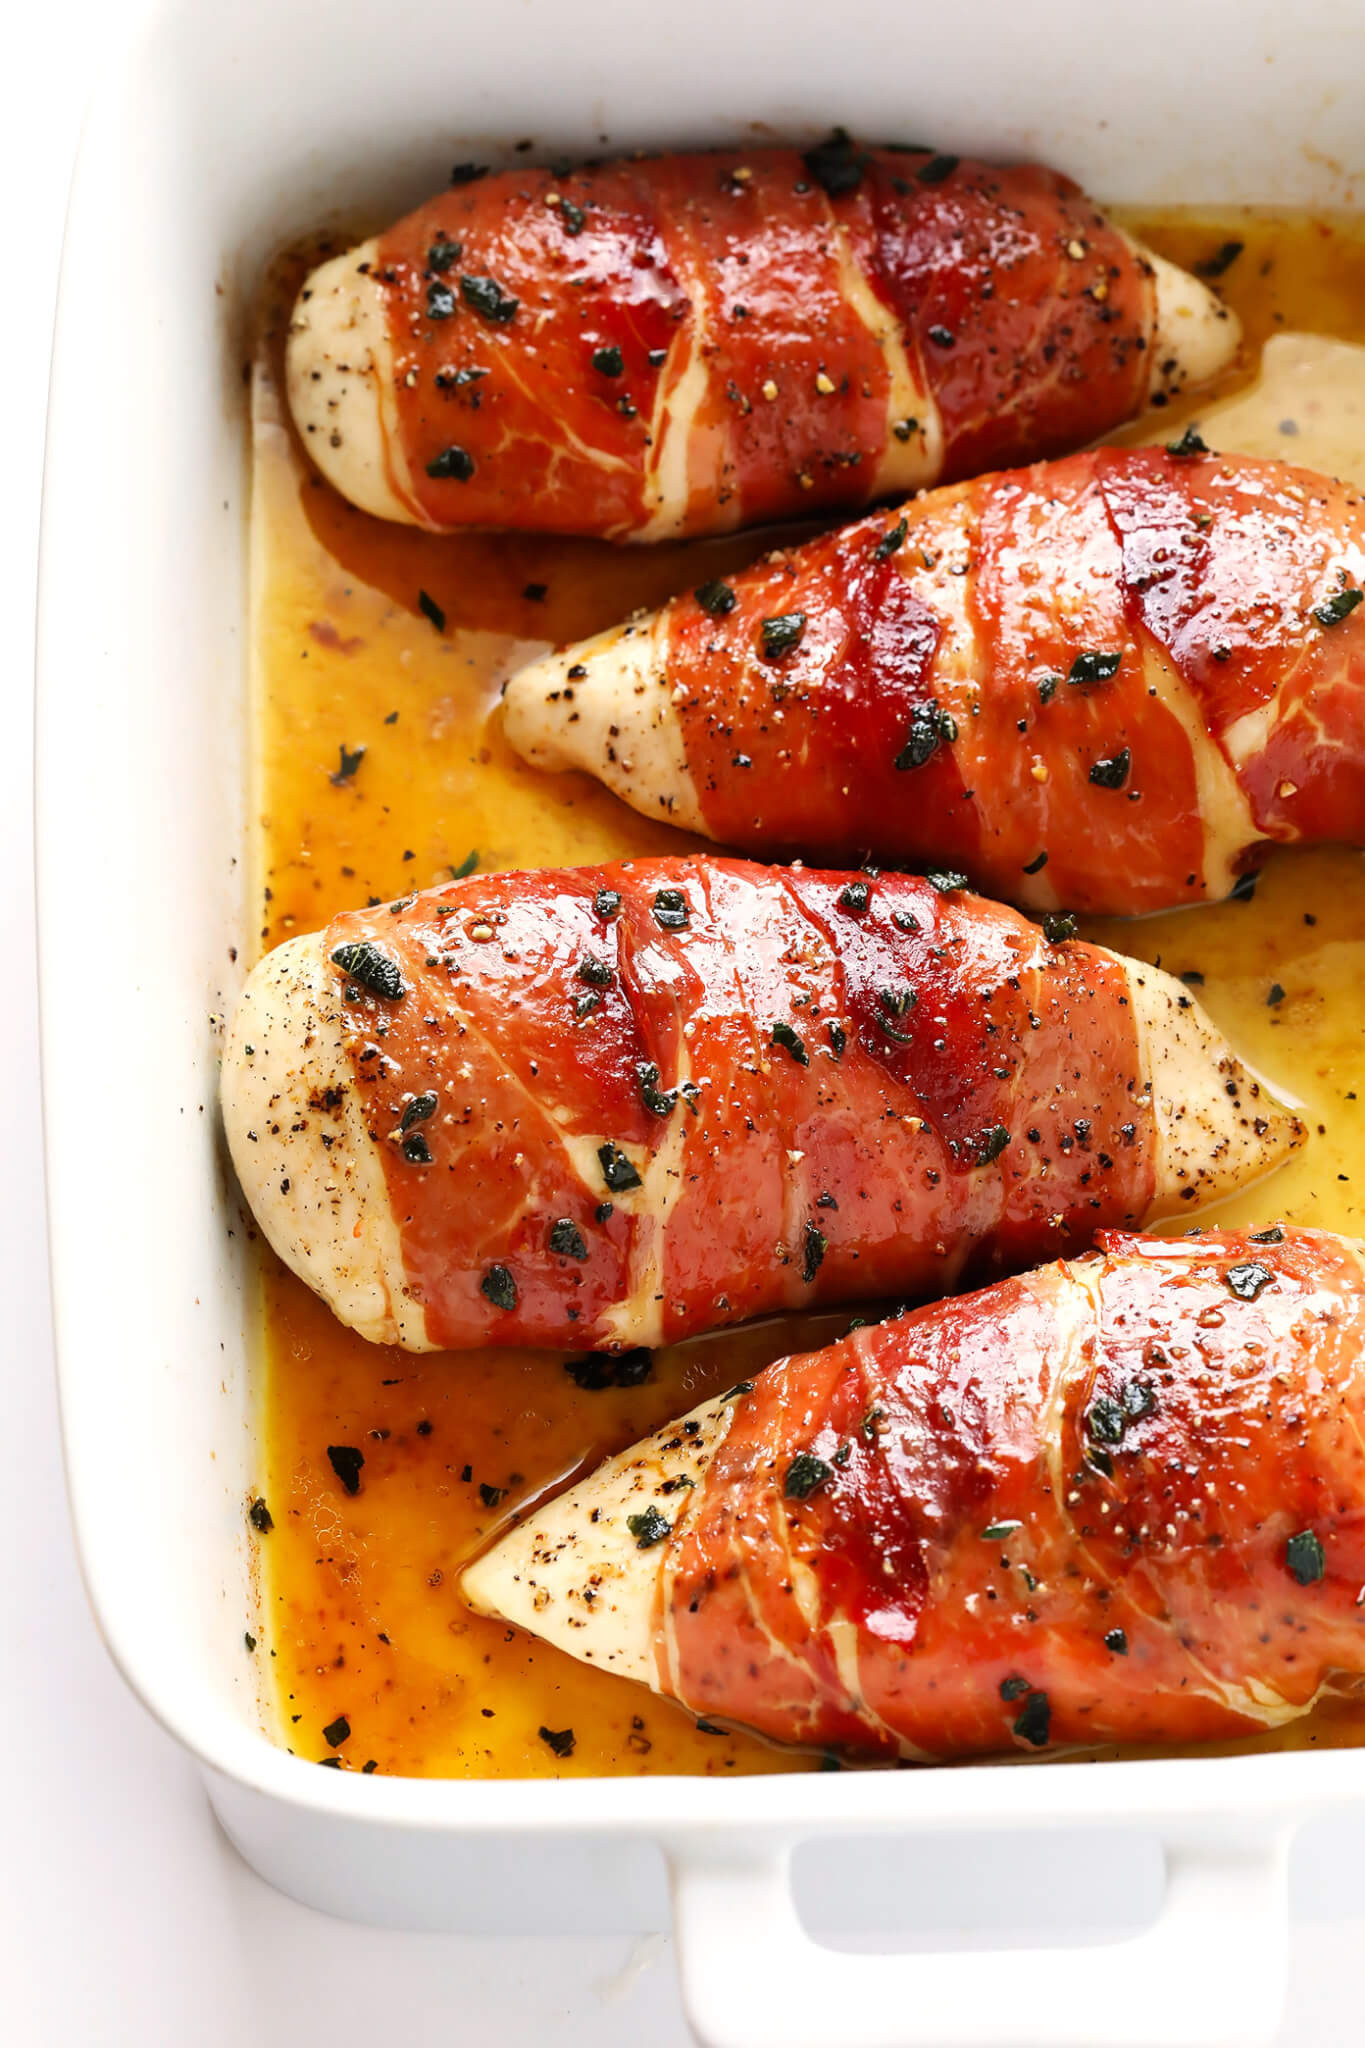 Healthy Veal Recipes
 Prosciutto Wrapped Baked Chicken